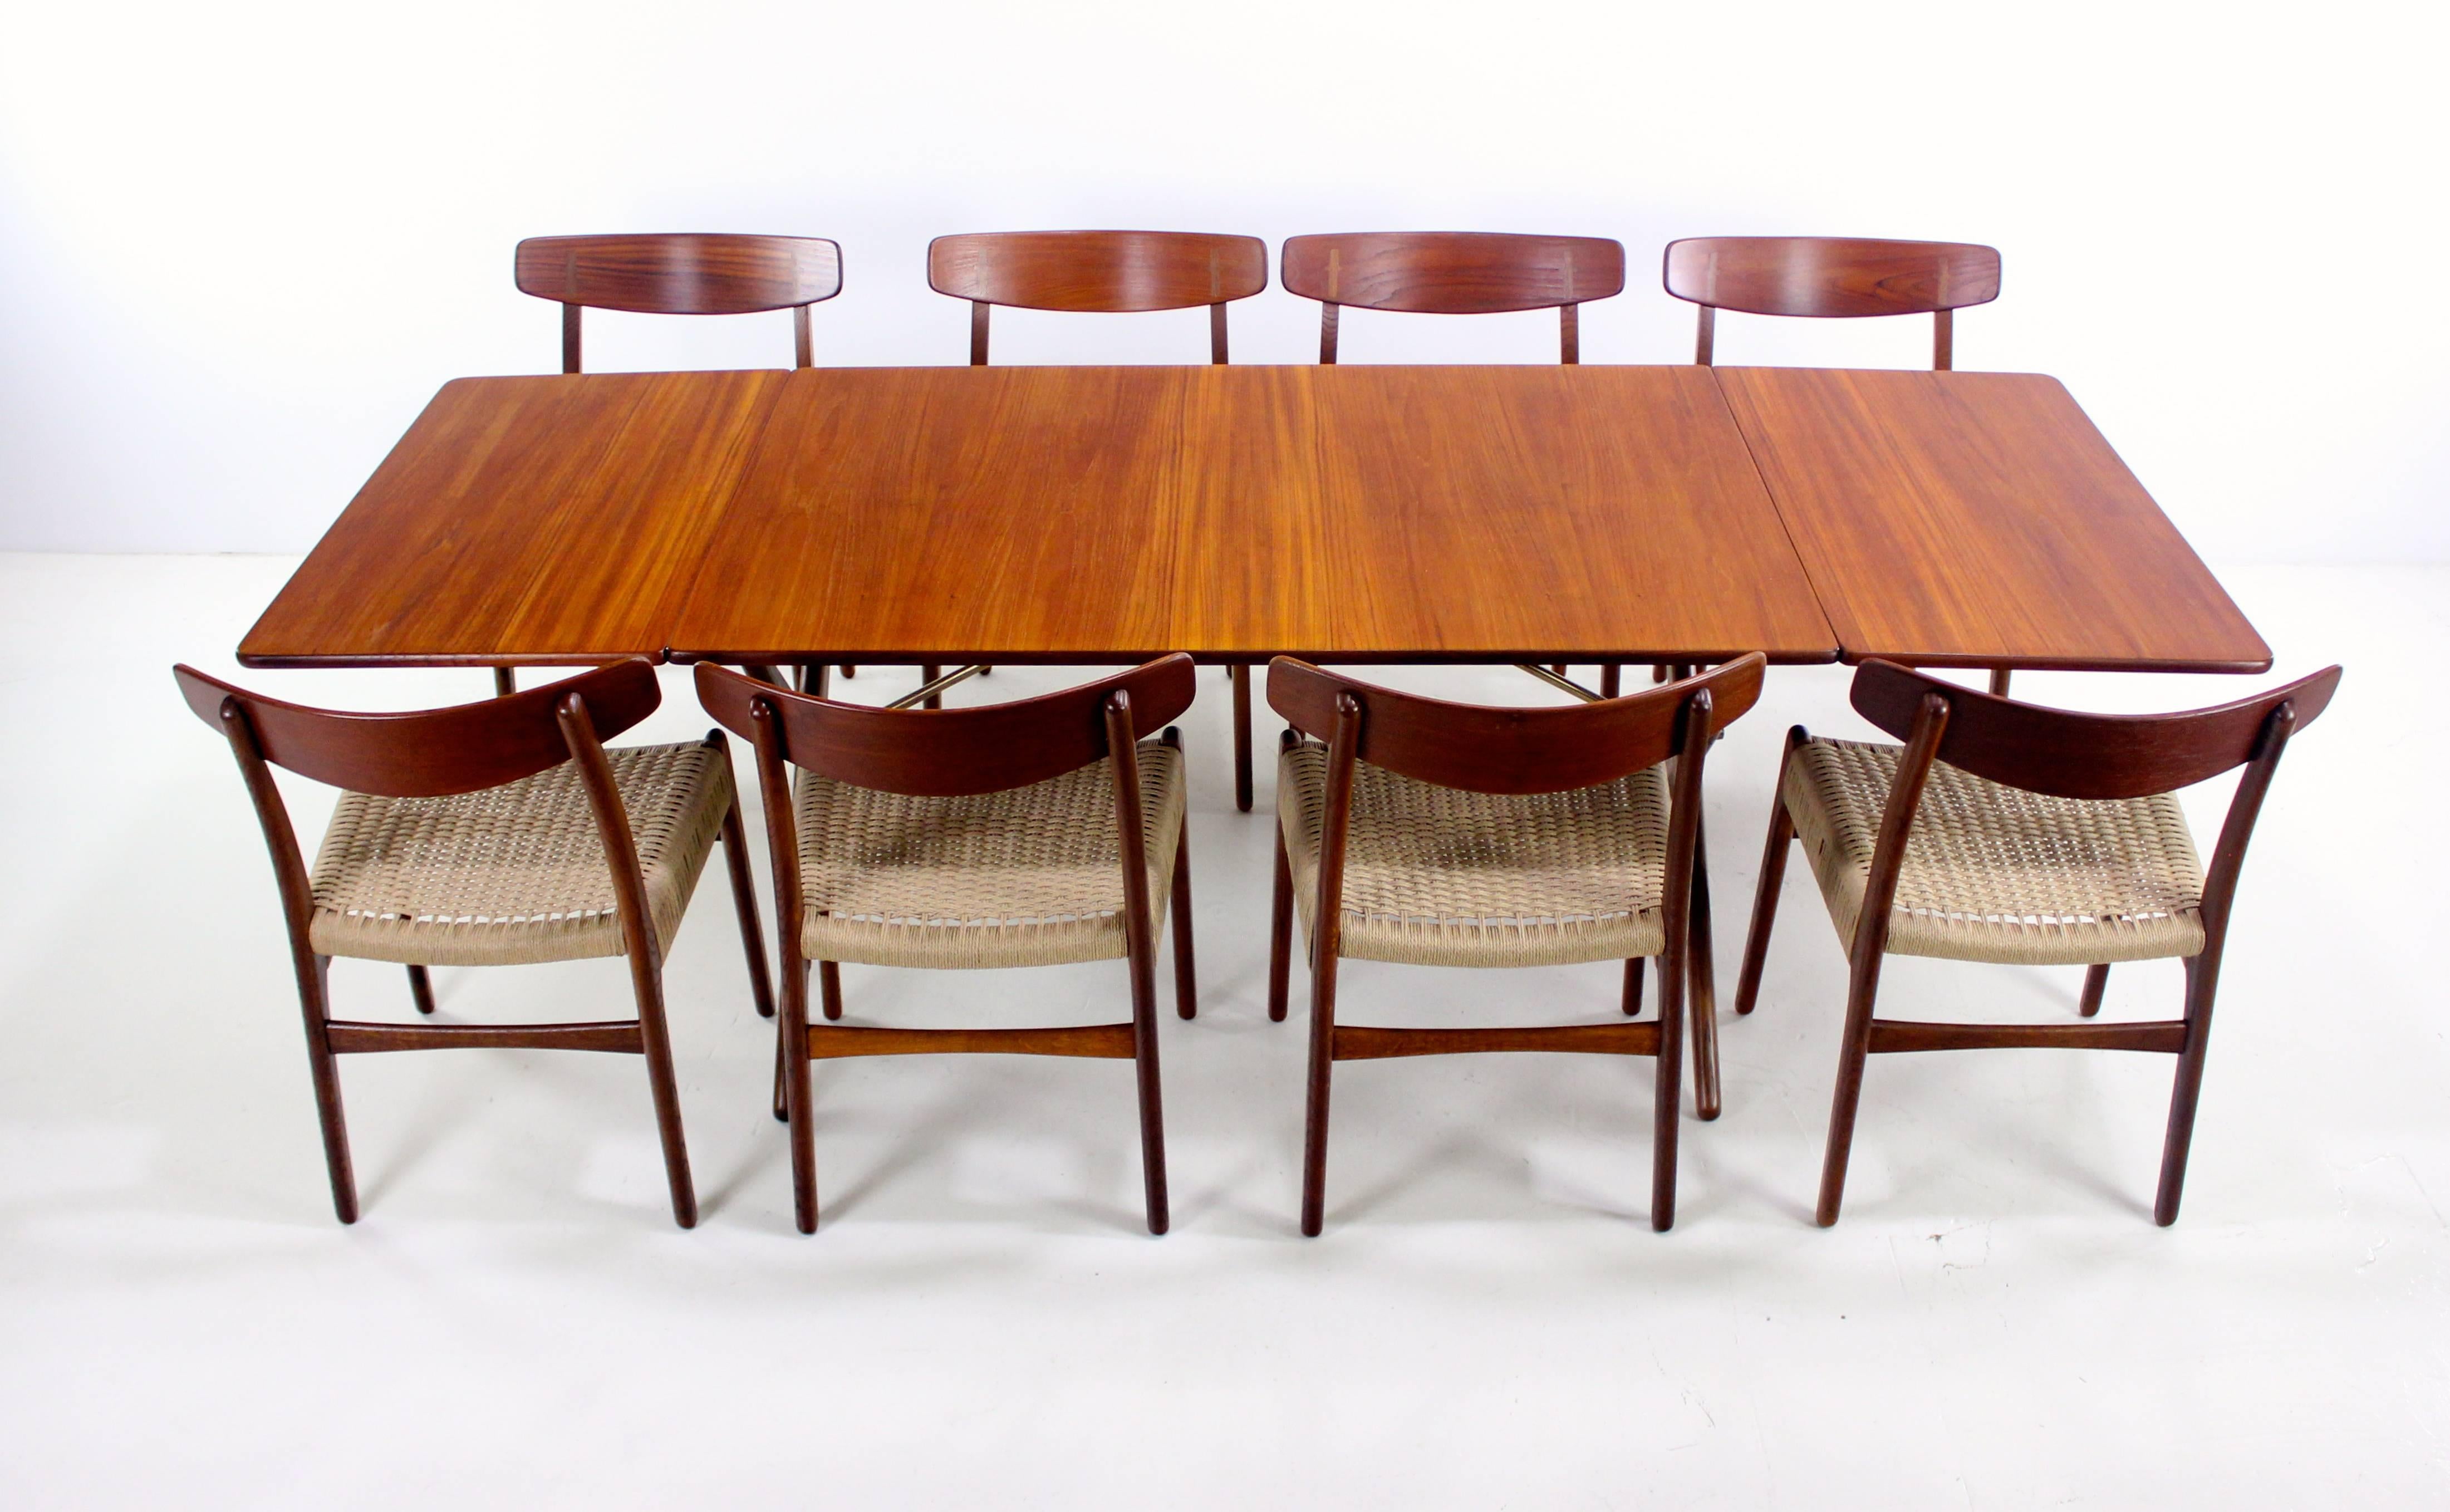 Danish modern dining set designed by Hans Wegner, circa 1950s.
Andreas Tuck, table maker.
Drop leaf table with richly grained teak top, beautifully styled oak legs and brass hardware.
Table measures 52